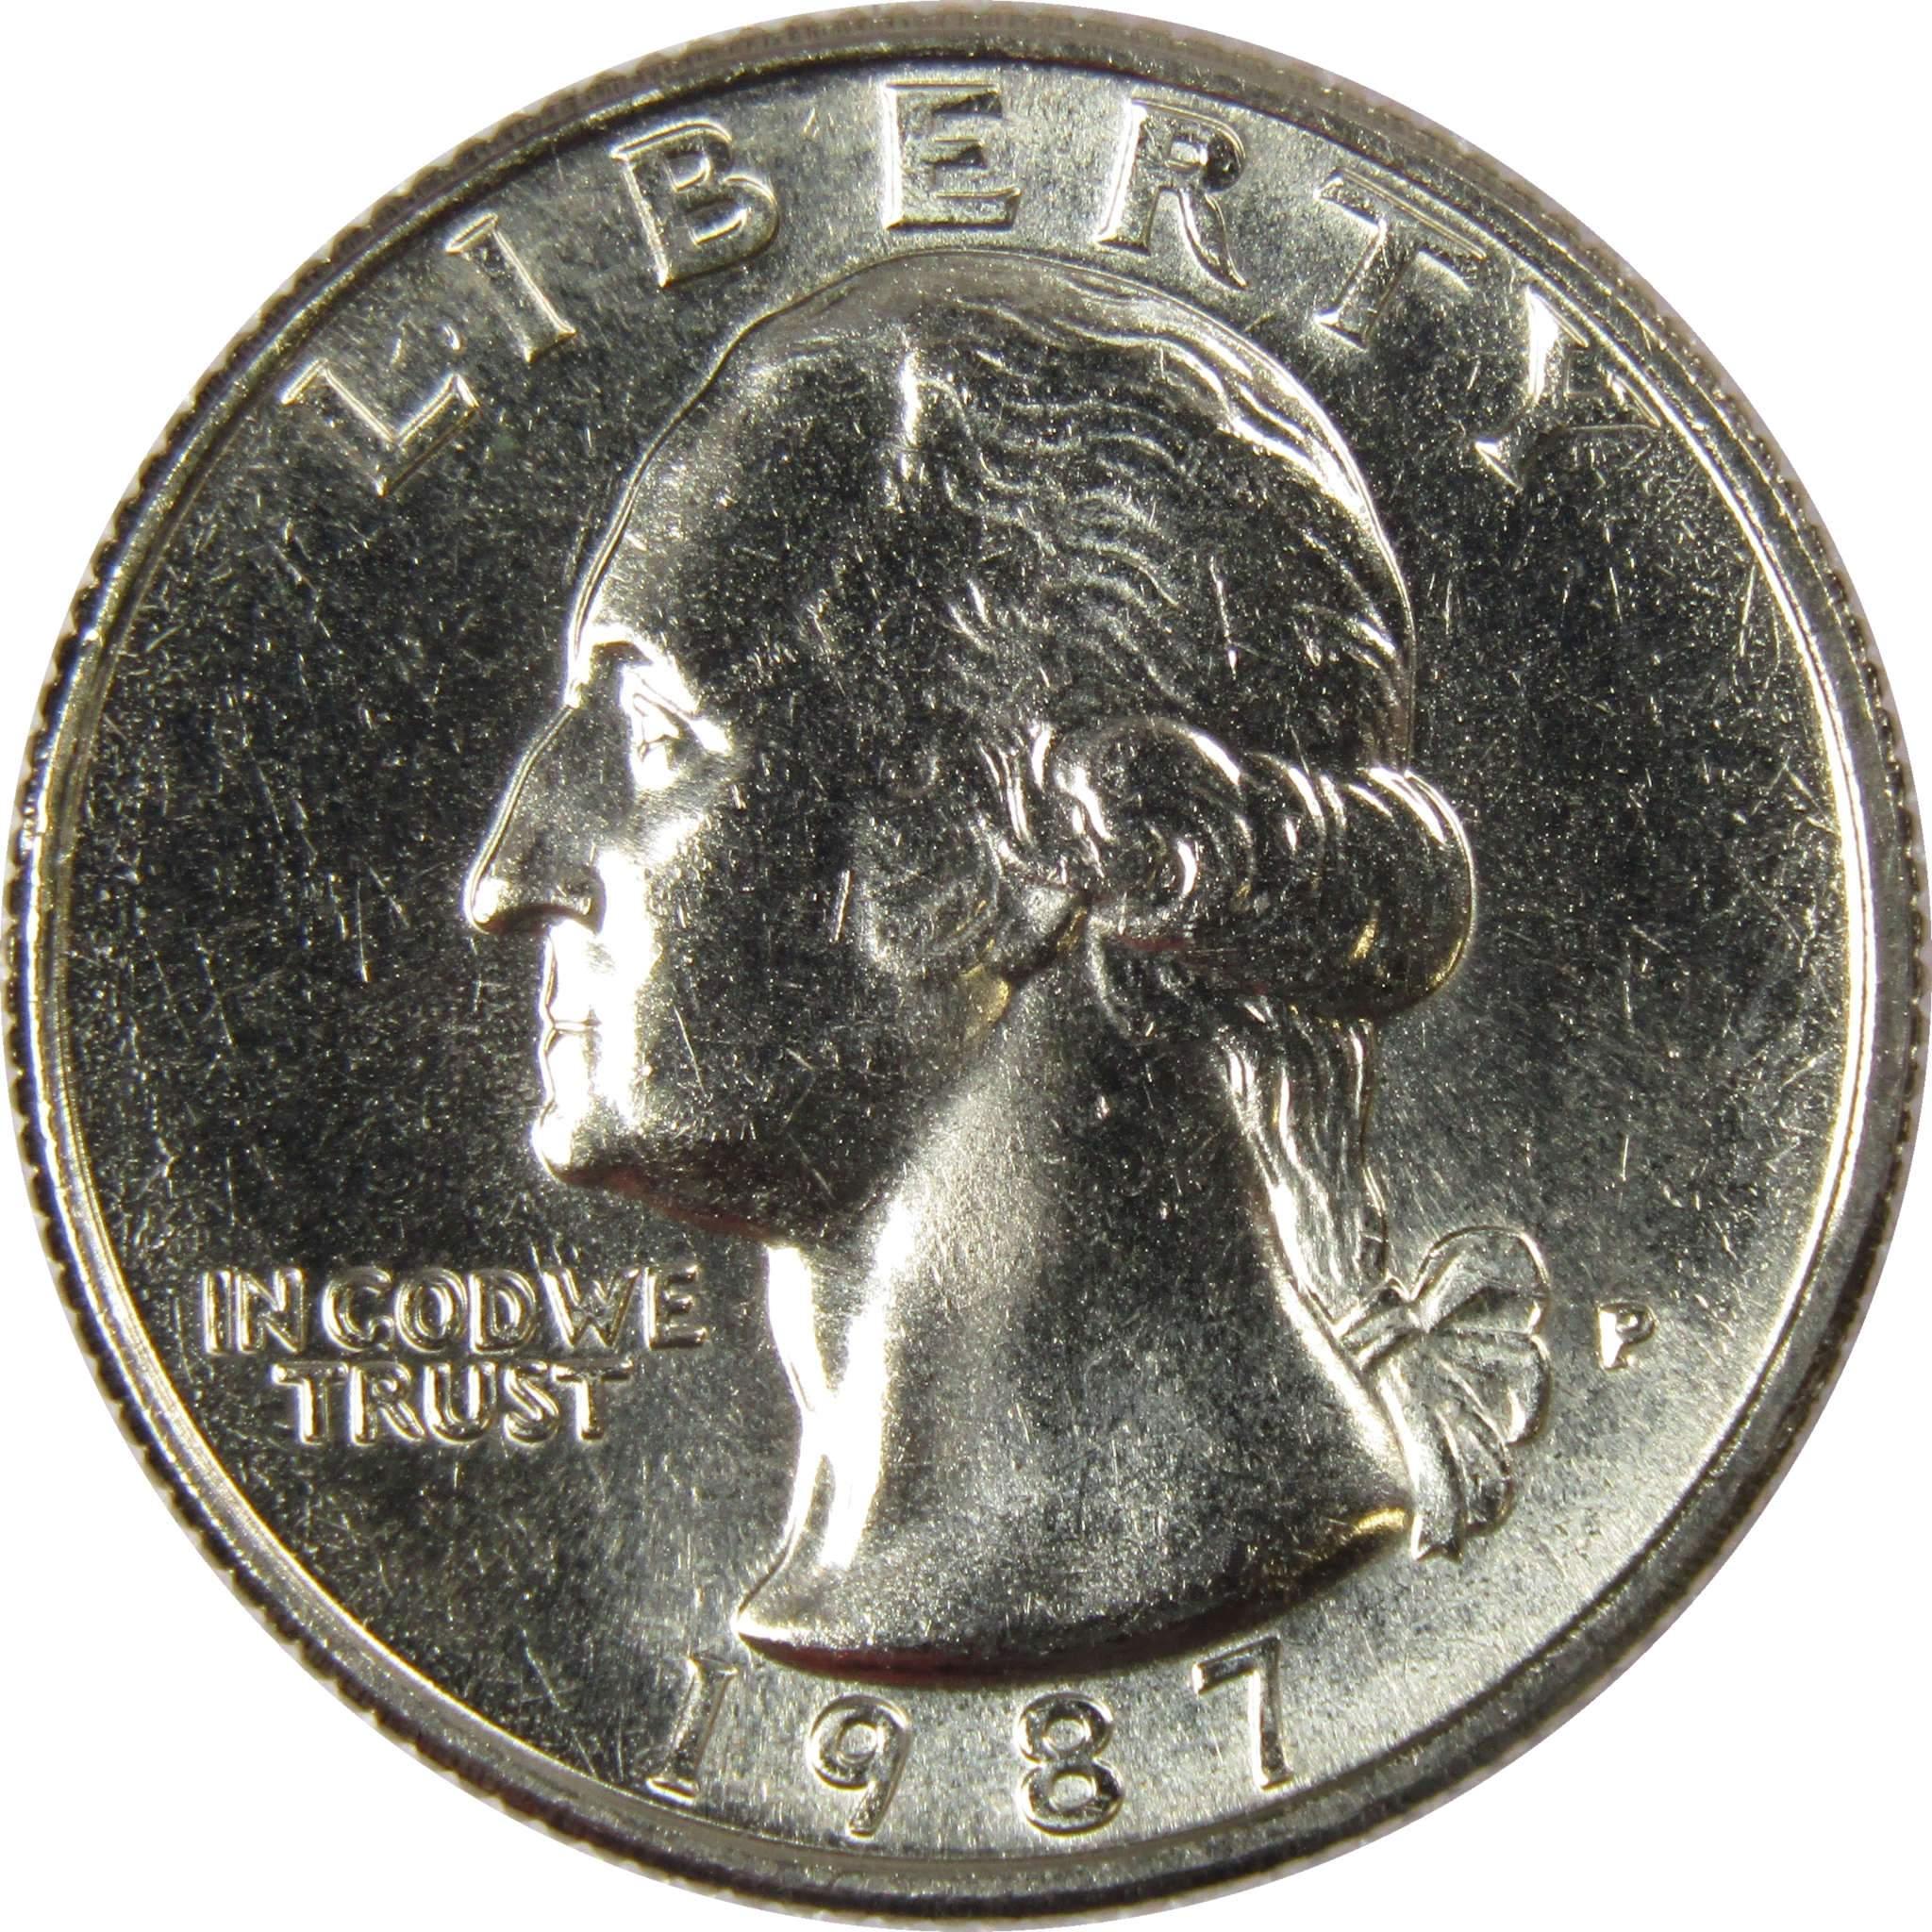 1987 P Washington Quarter BU Uncirculated Mint State 25c US Coin Collectible